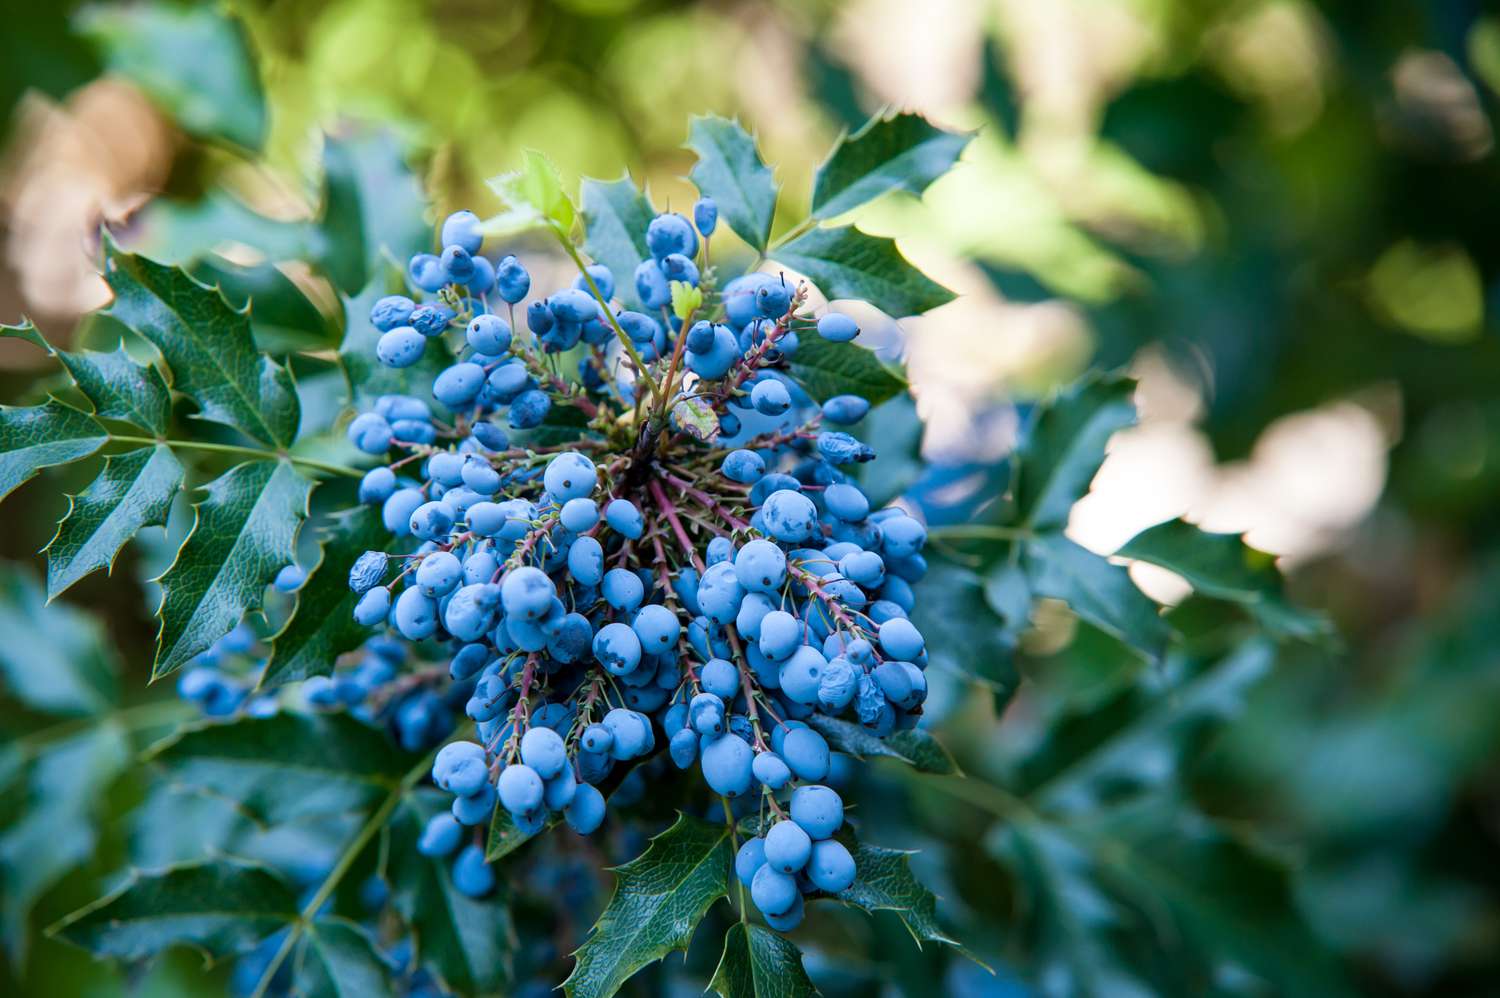 Oregon grape shrub branch with light blue grapes and leaves